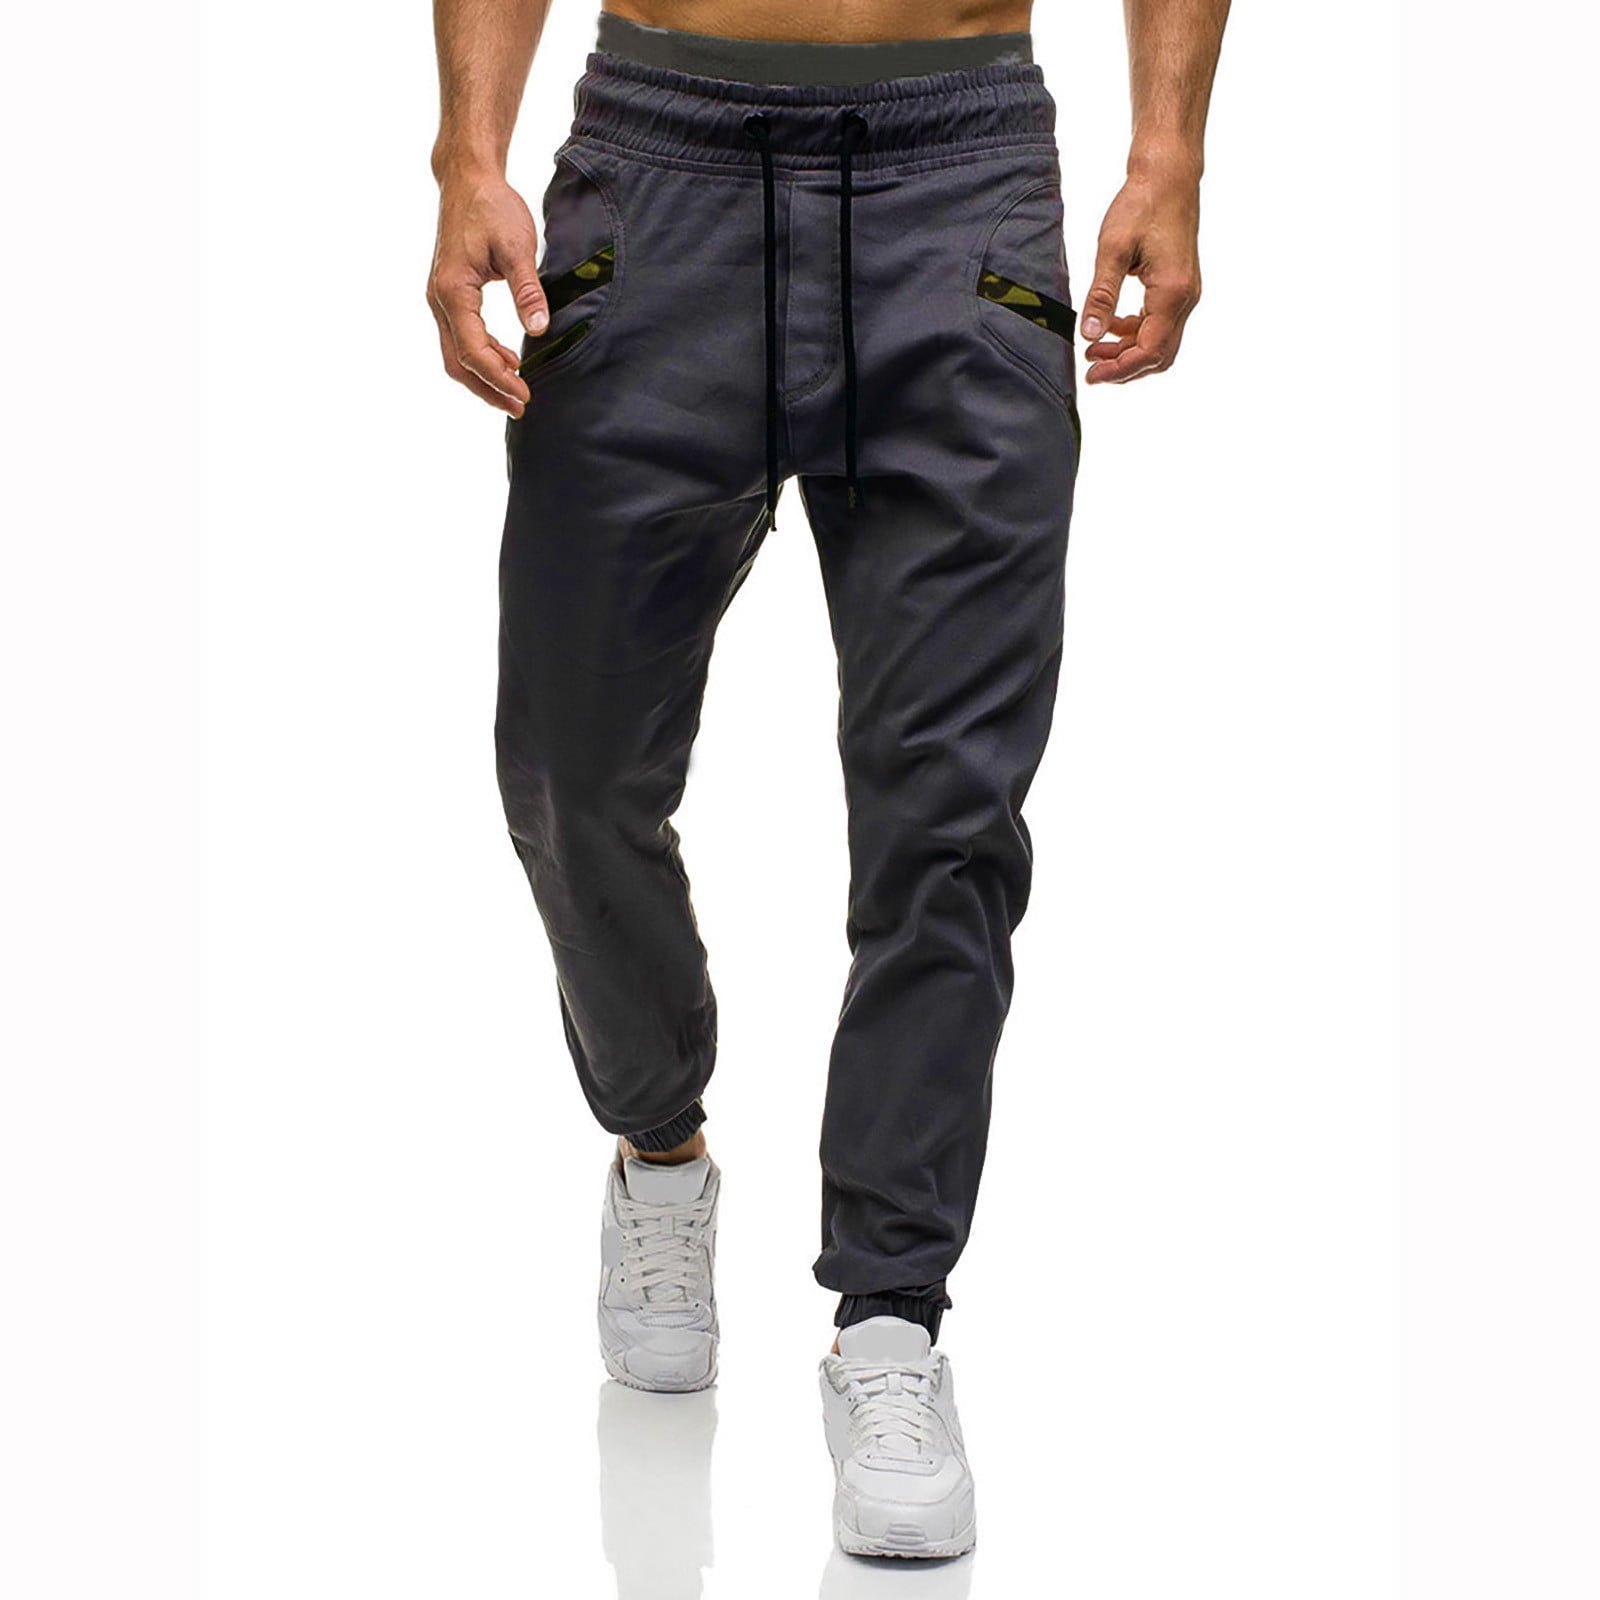 BALEAF Men's Cotton Yoga Sweatpants Open Bottom Joggers Straight Leg  Running Casual Loose Fit Athletic Pants With Pockets Black XL 